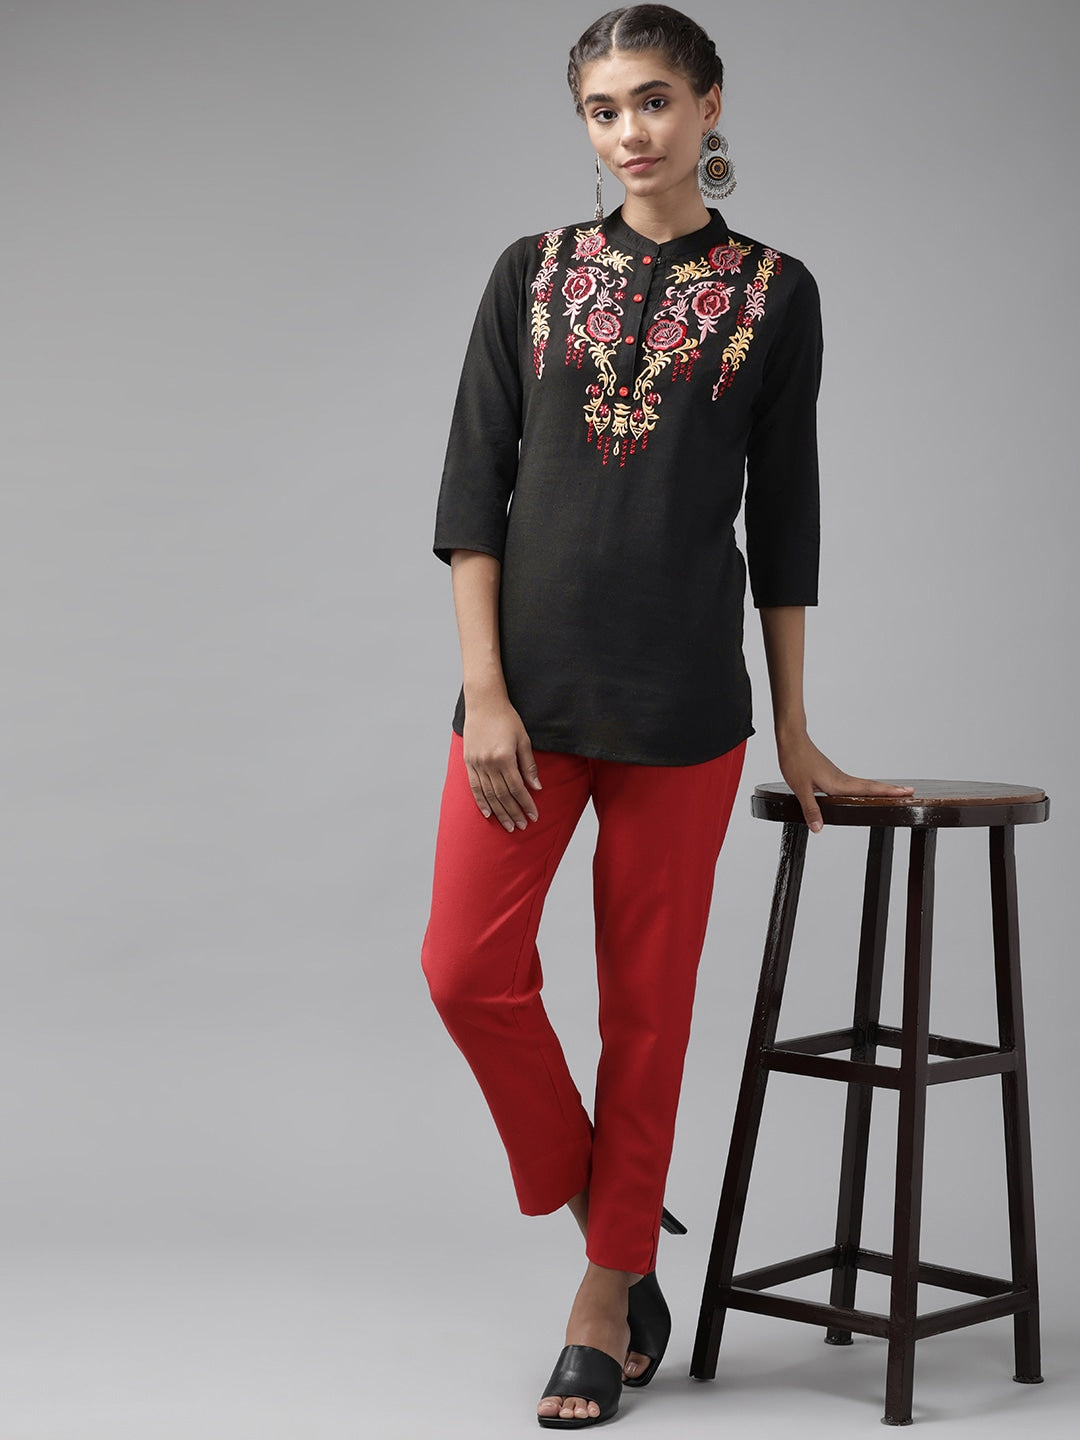 Black Floral Embroidered Top Yufta Store